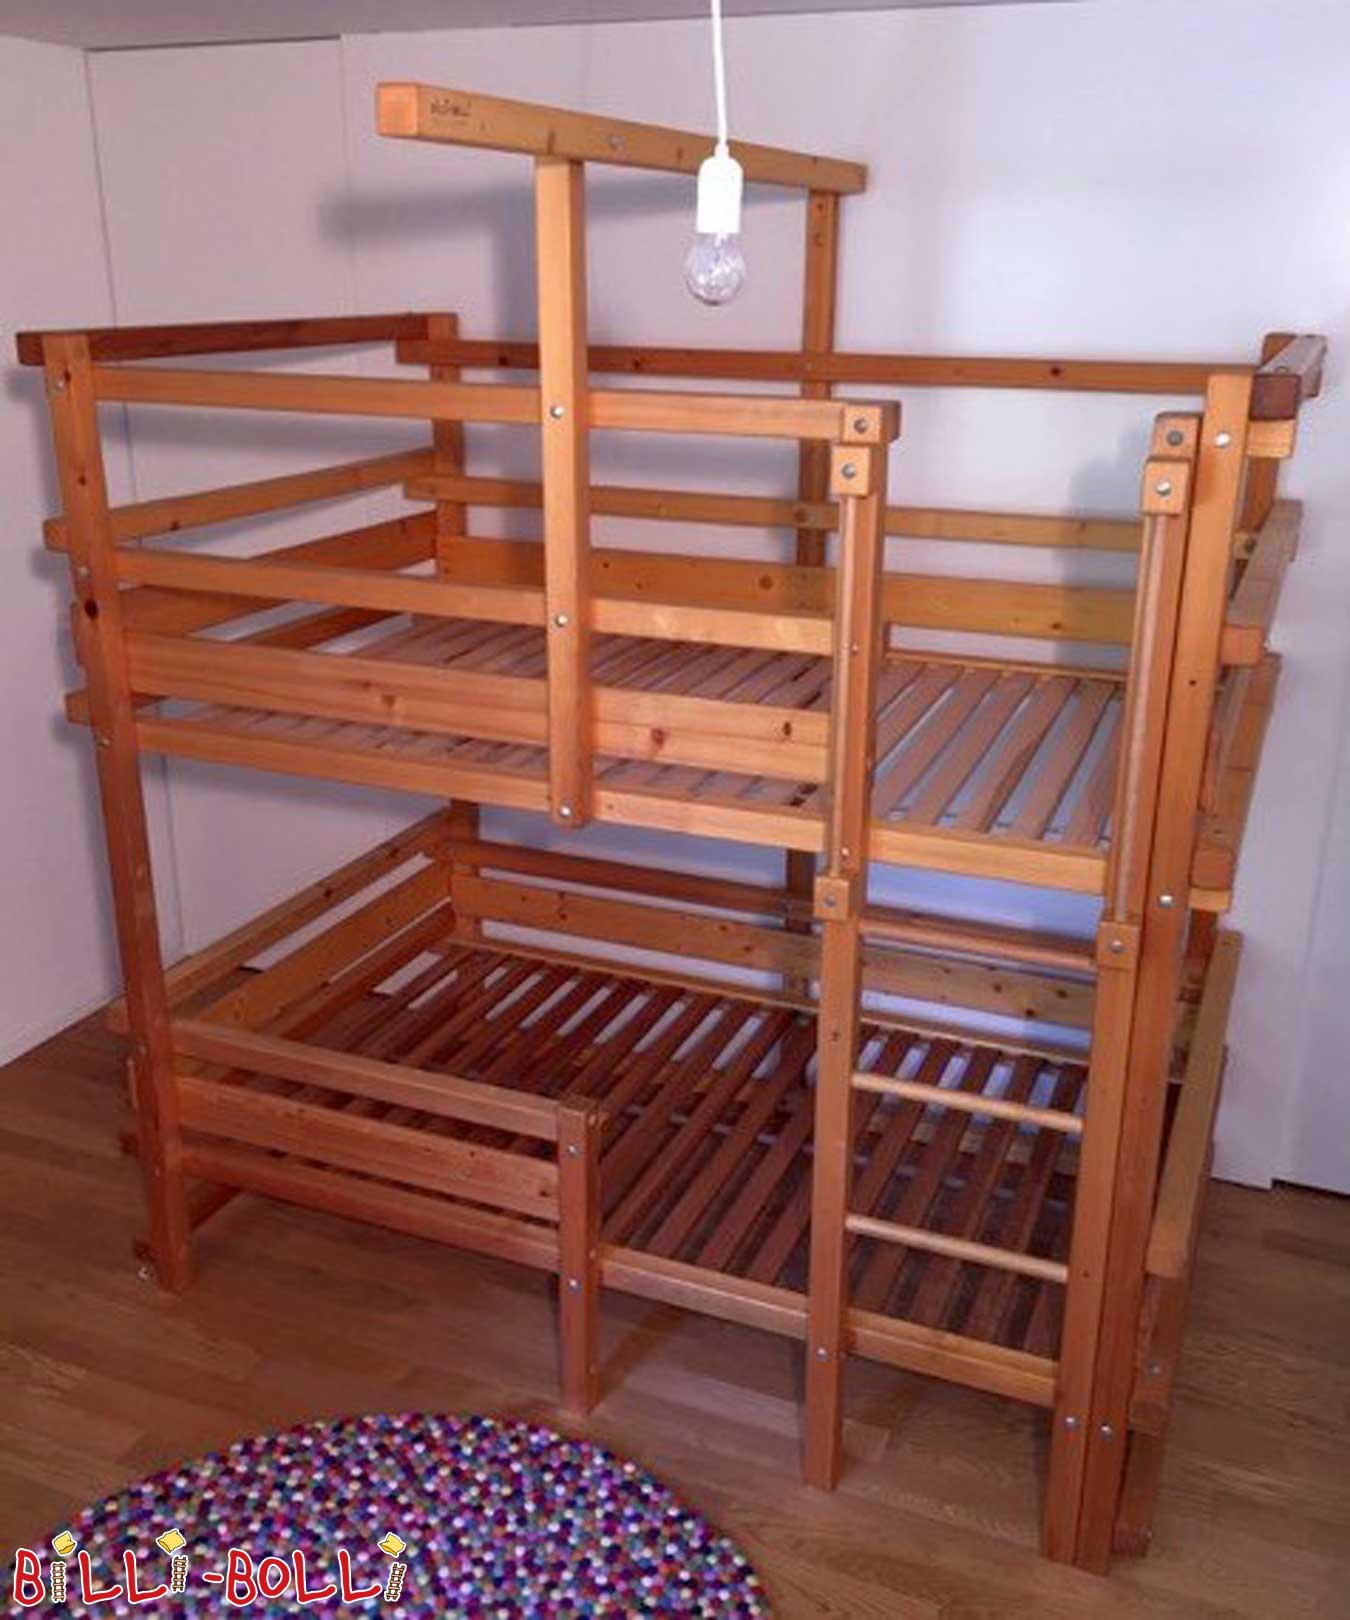 Bunk bed, 120 x 200 cm, oiled-waxed spruce (Category: second hand loft bed)